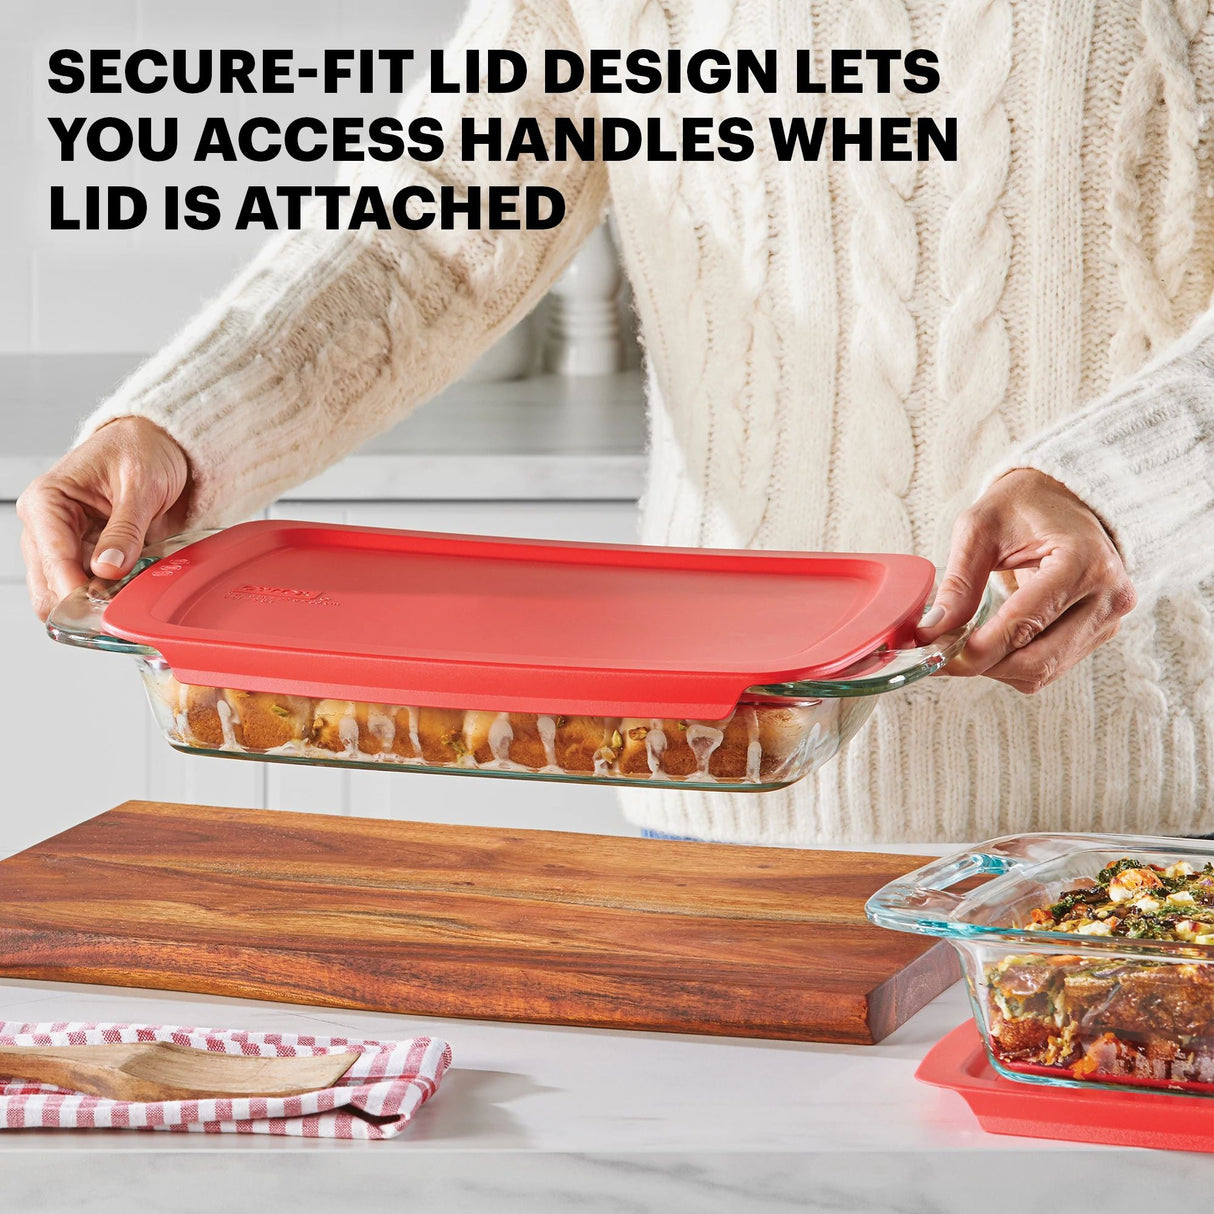  Easy Grab 3-qt Baking dish with text secure fit lid design lets you access handles when lid is attached